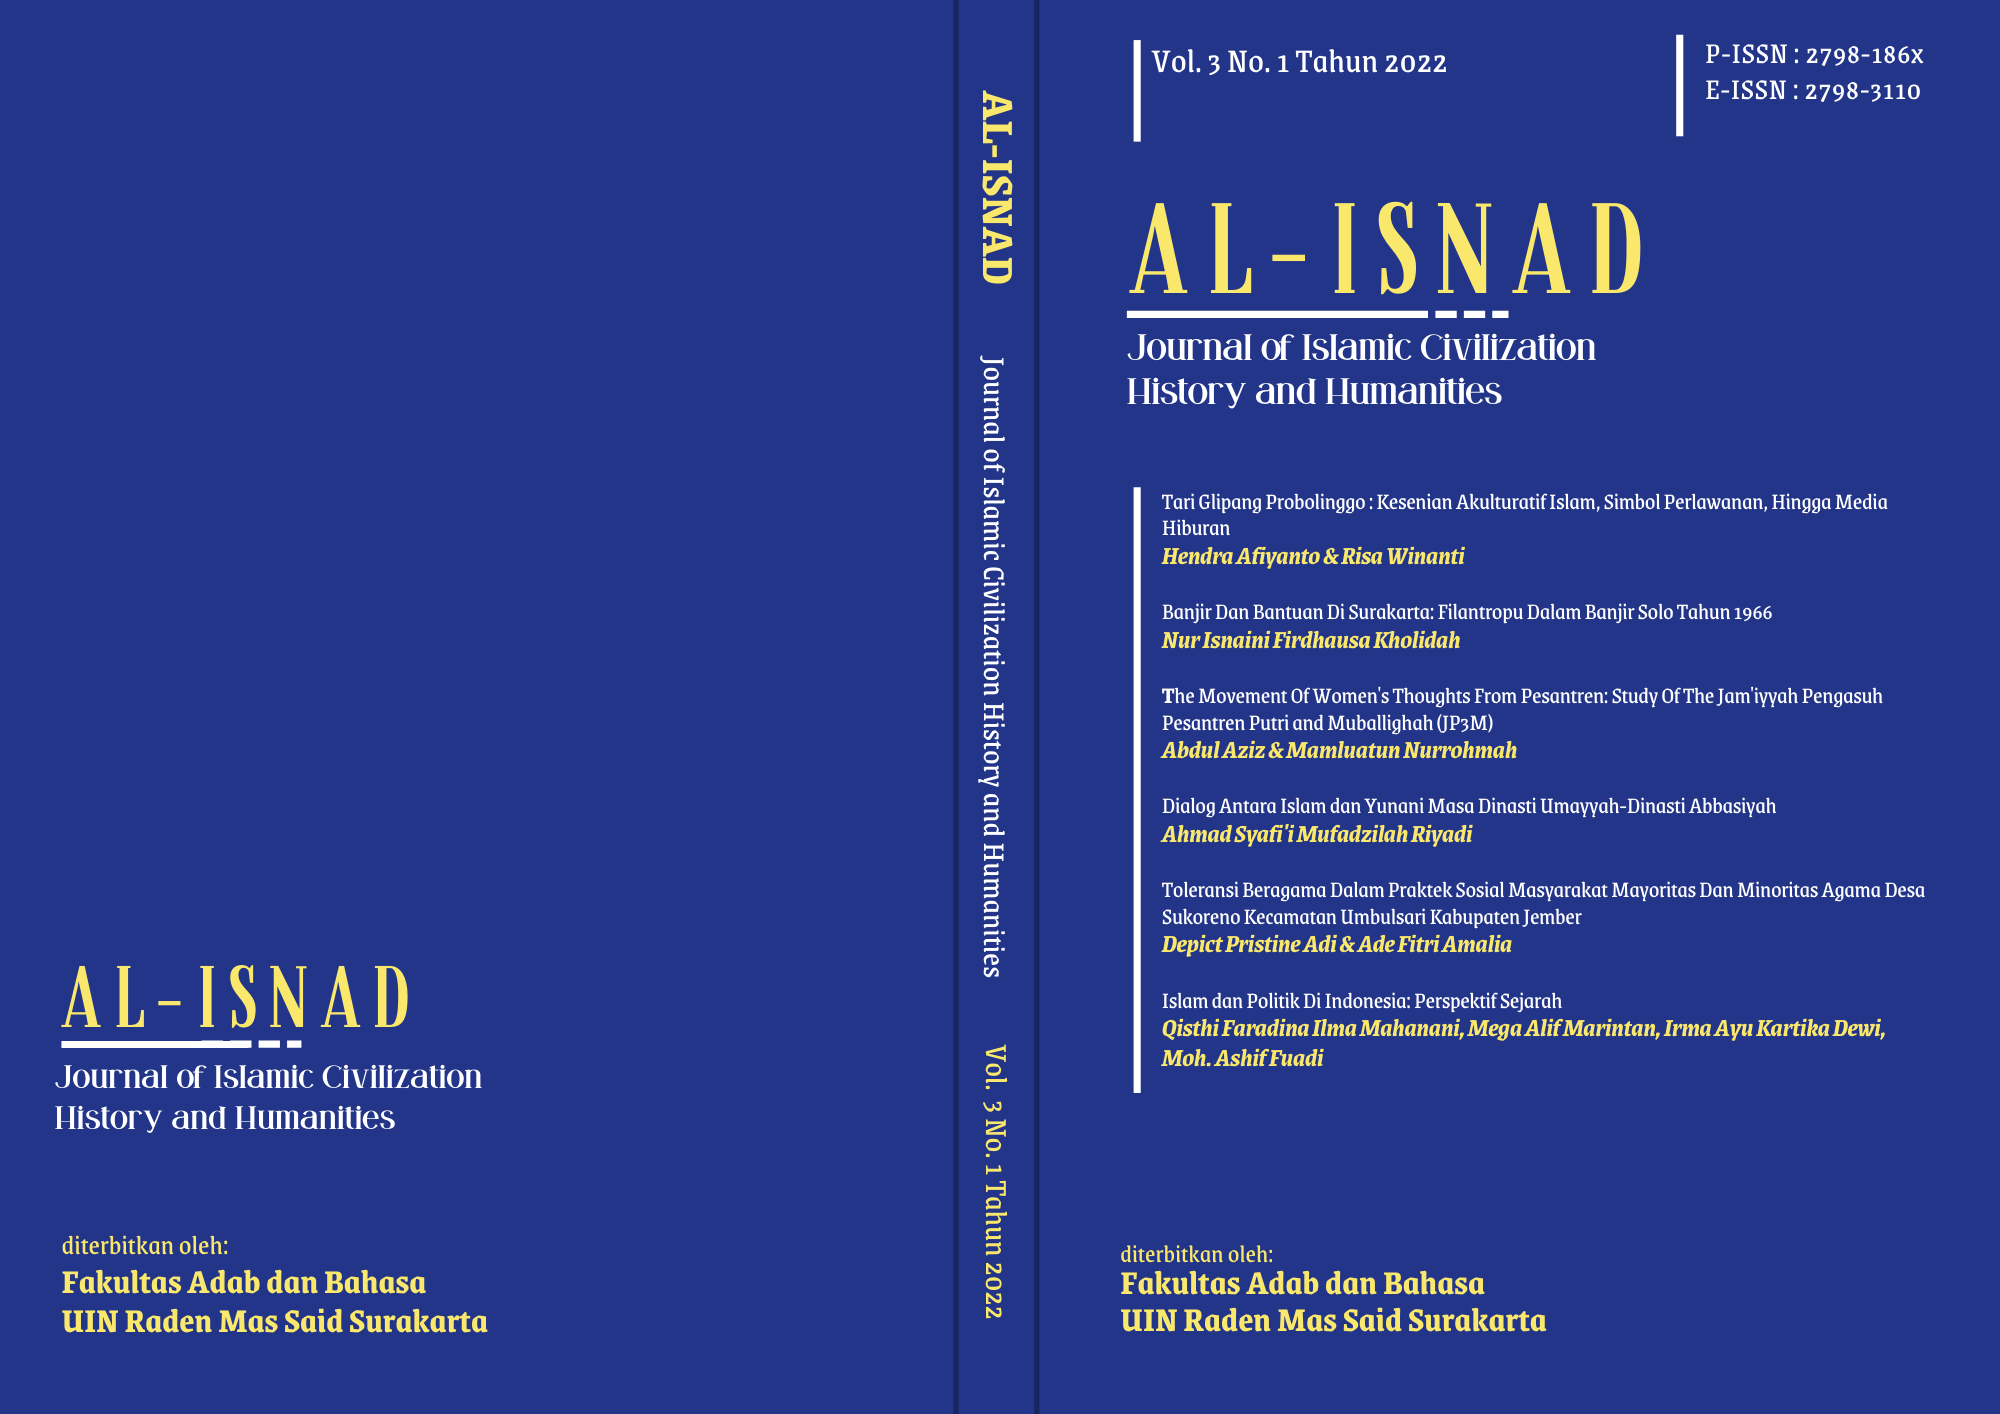 					View Vol. 3 No. 1 (2022): Al-Isnad: Journal of Islamic Civilization History and Humanities
				